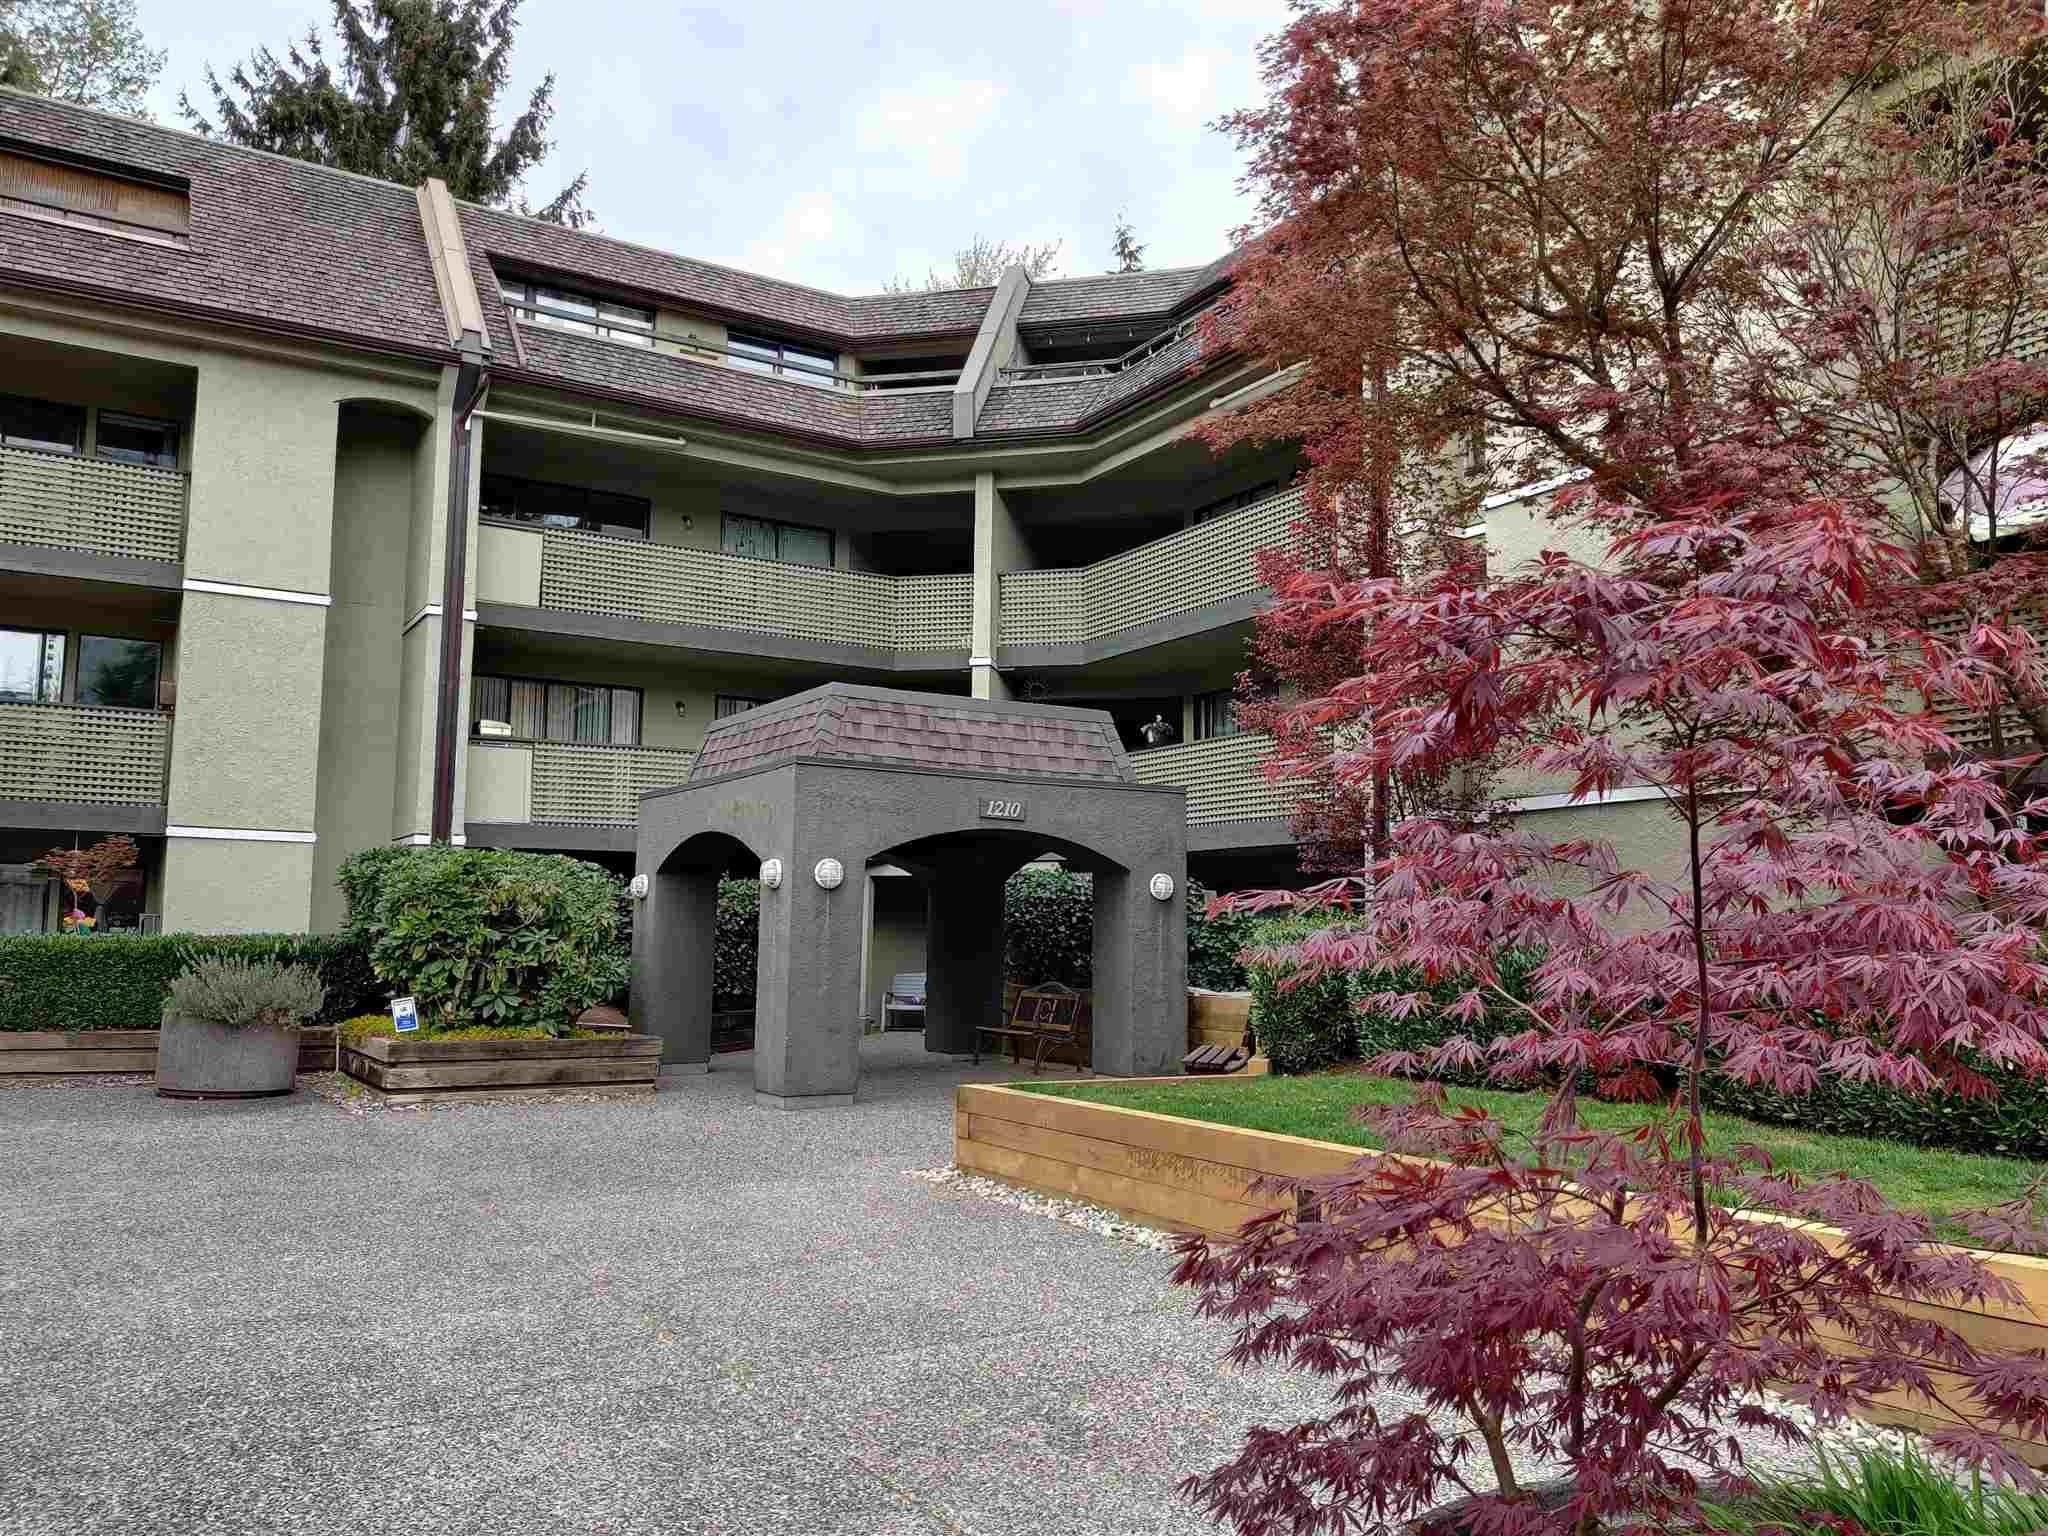 Main Photo: 201 1210 PACIFIC STREET in : North Coquitlam Condo for sale : MLS®# R2601014